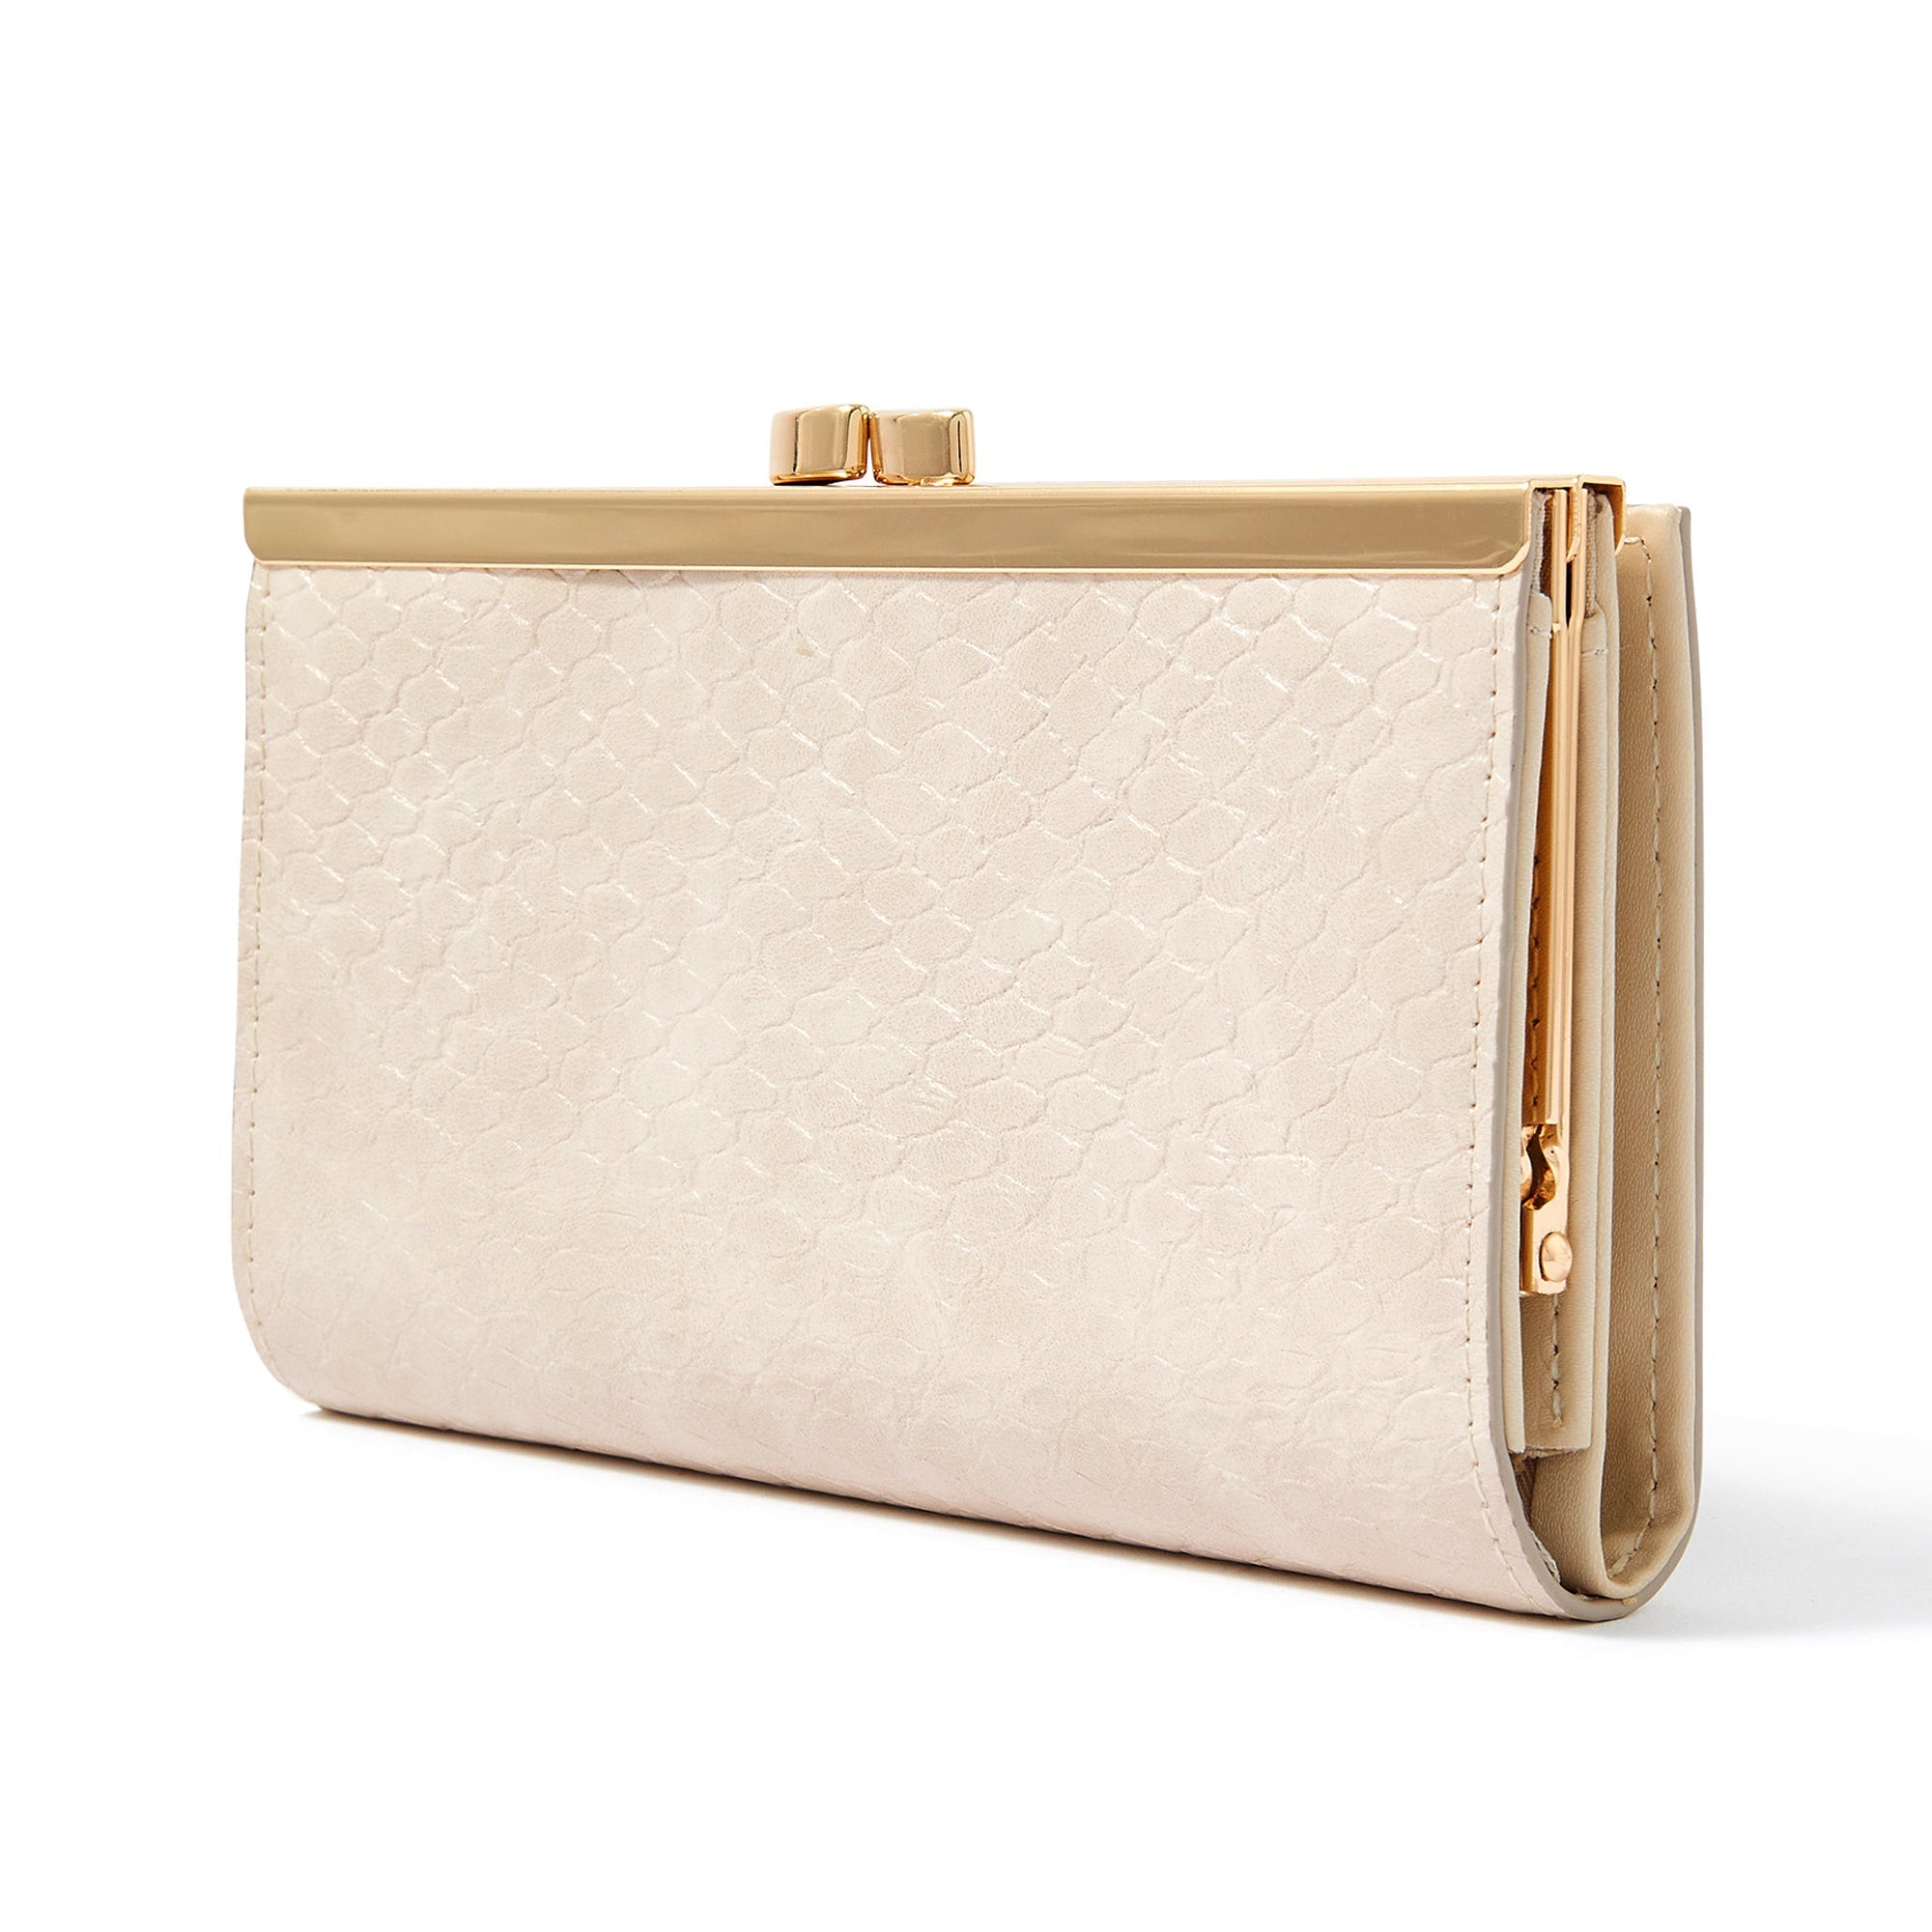 Cream Quilted Leather-Look Bee Midi Purse | New Look